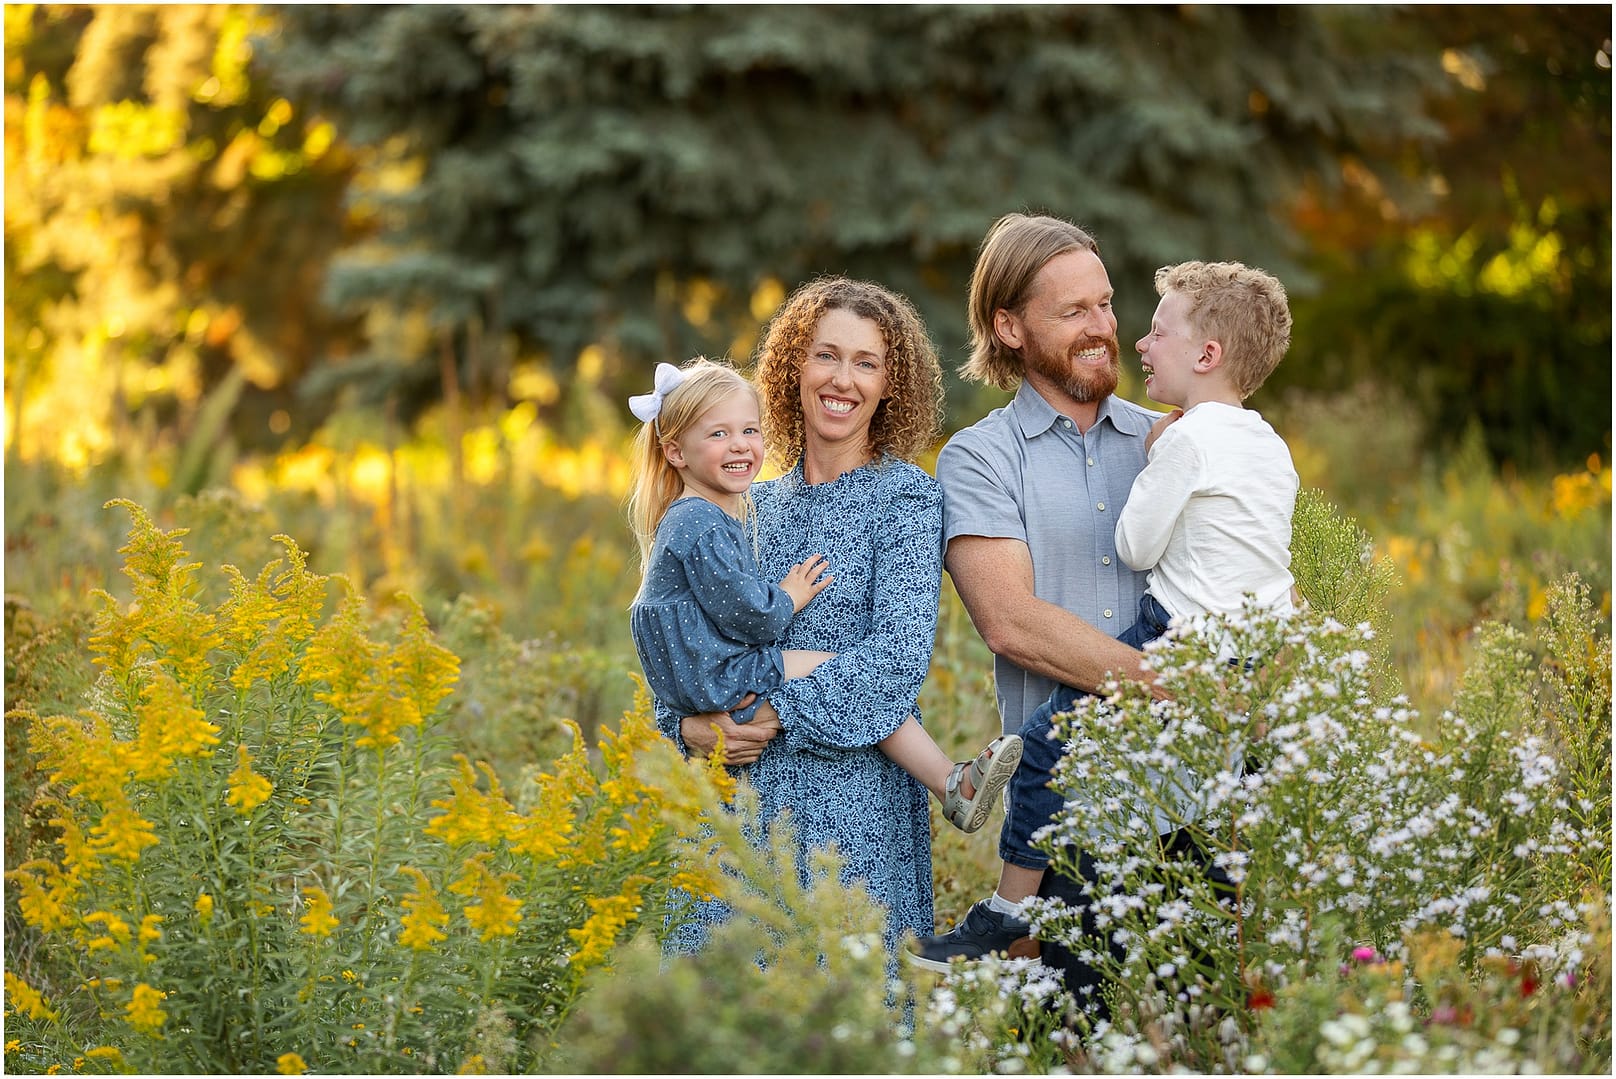 Family of four laughs during photo session. Photo by Tiffany Hix Photography.